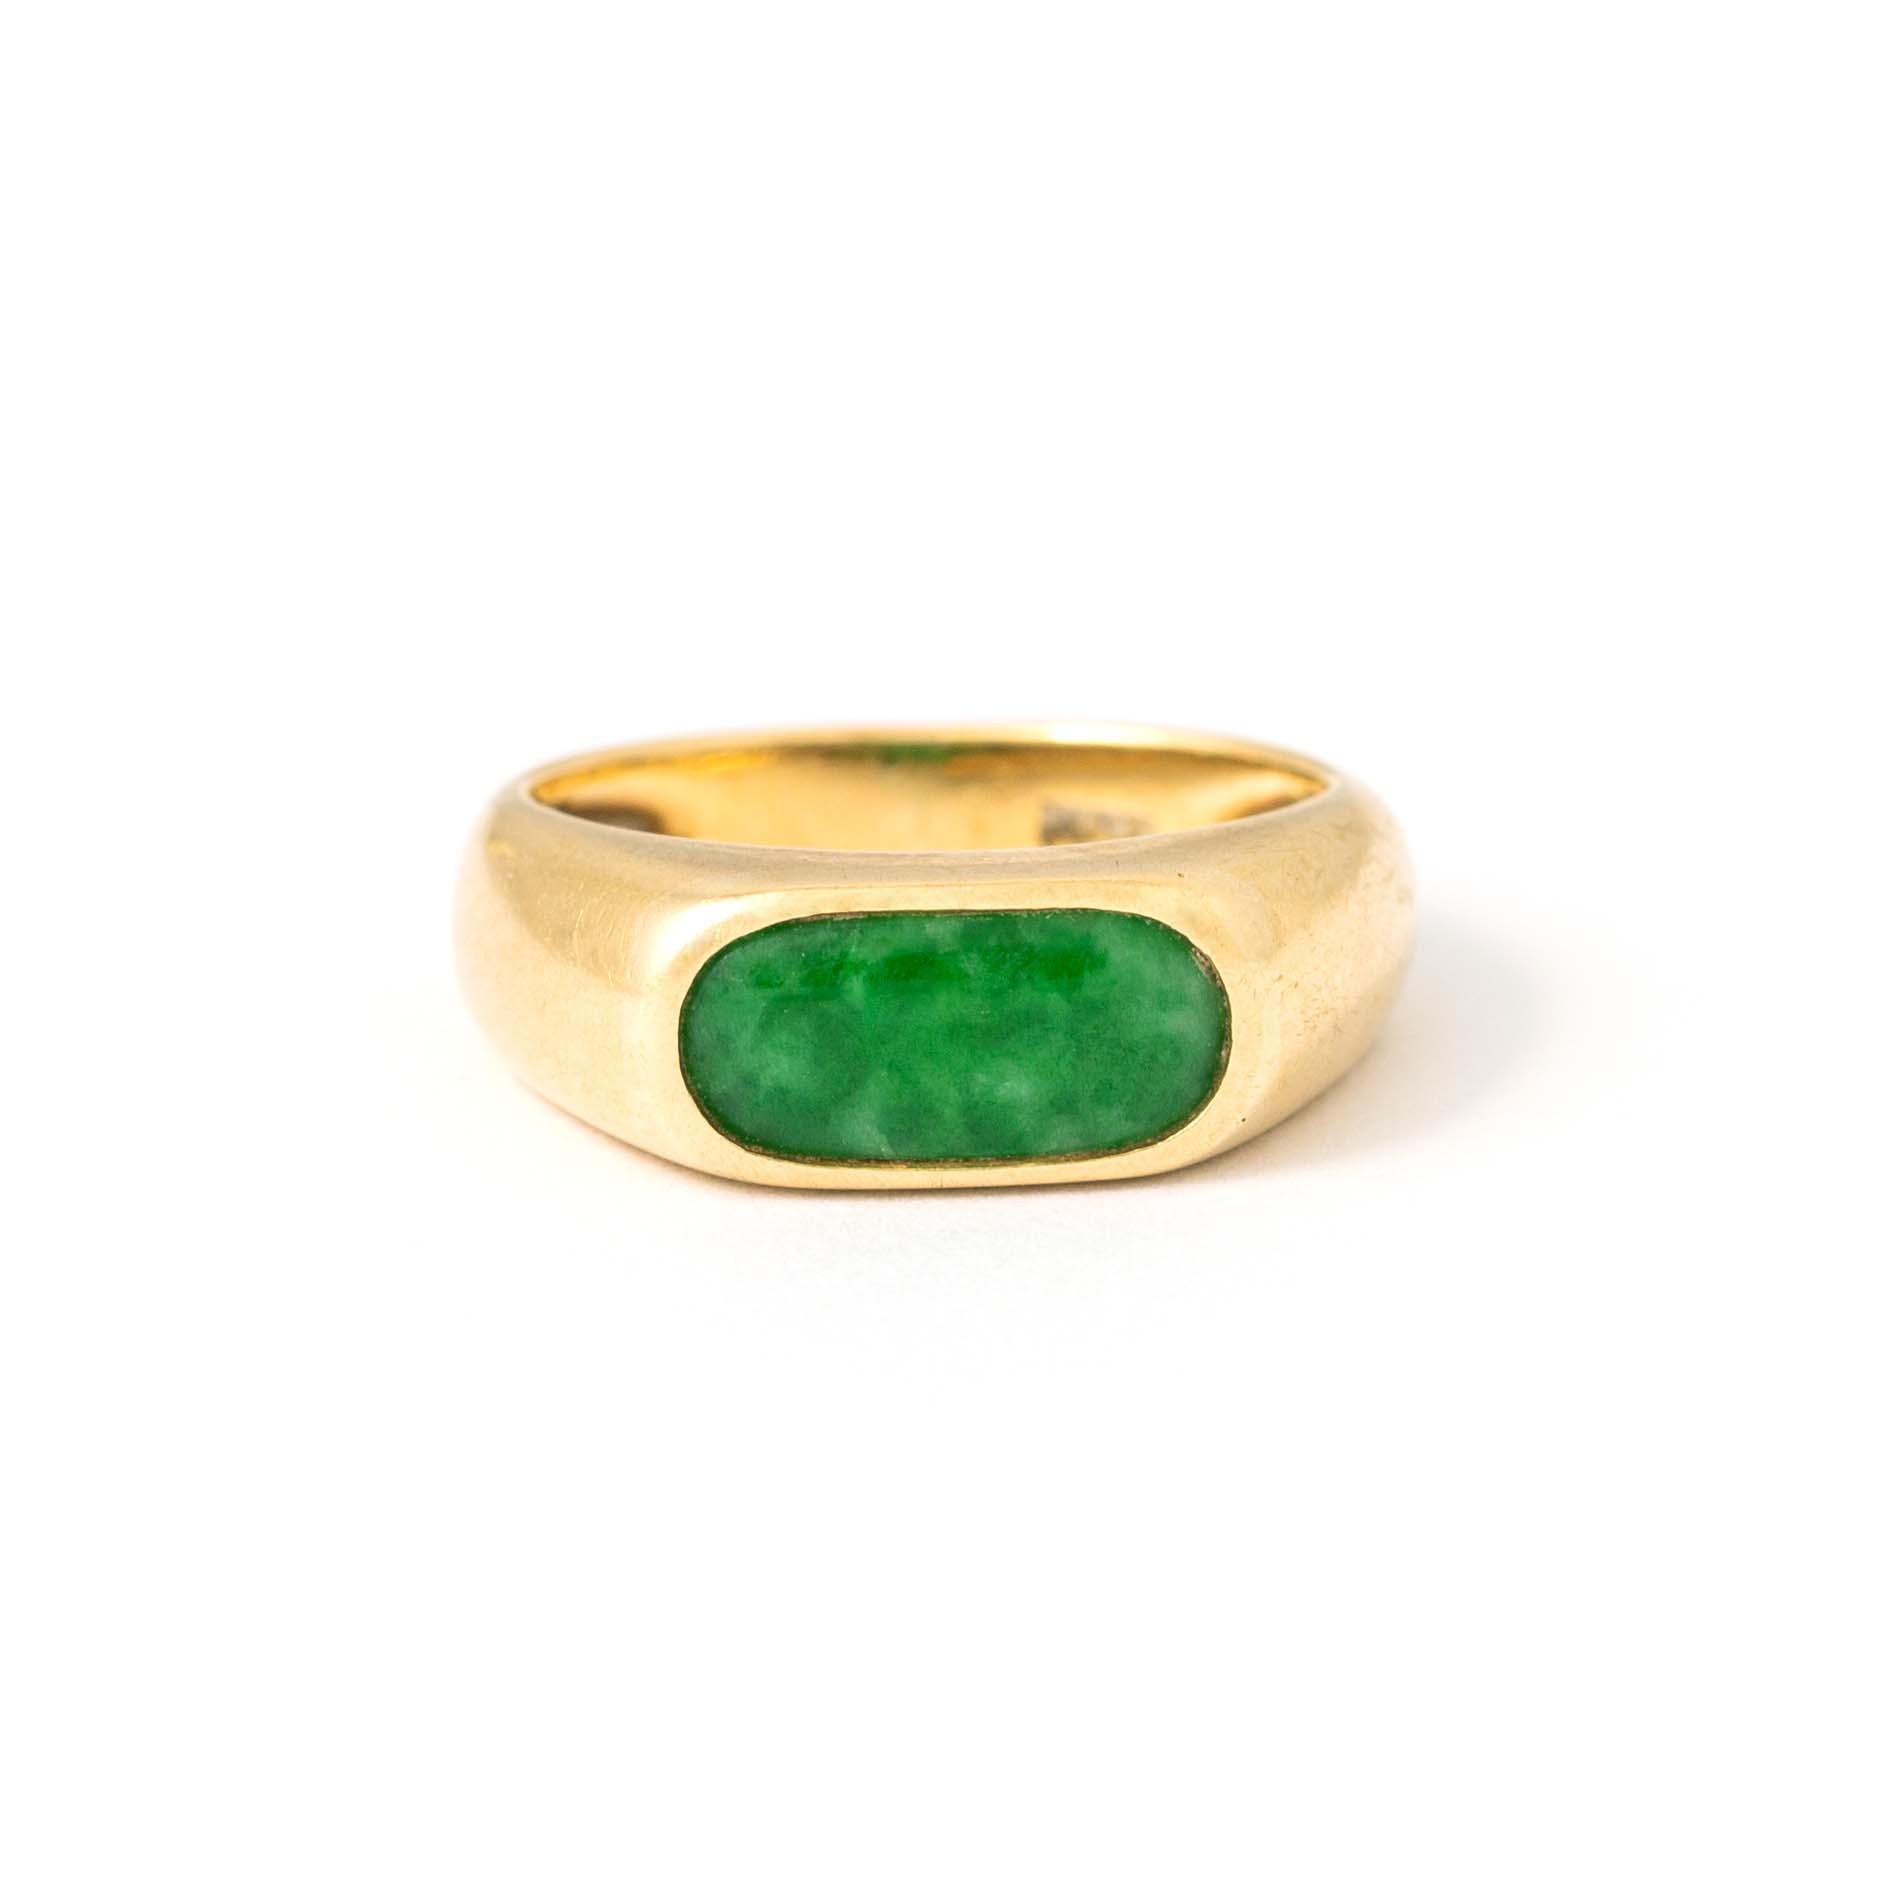 18K yellow gold ring centered with a green hard stone.
Gross weight: 4.14 grams.